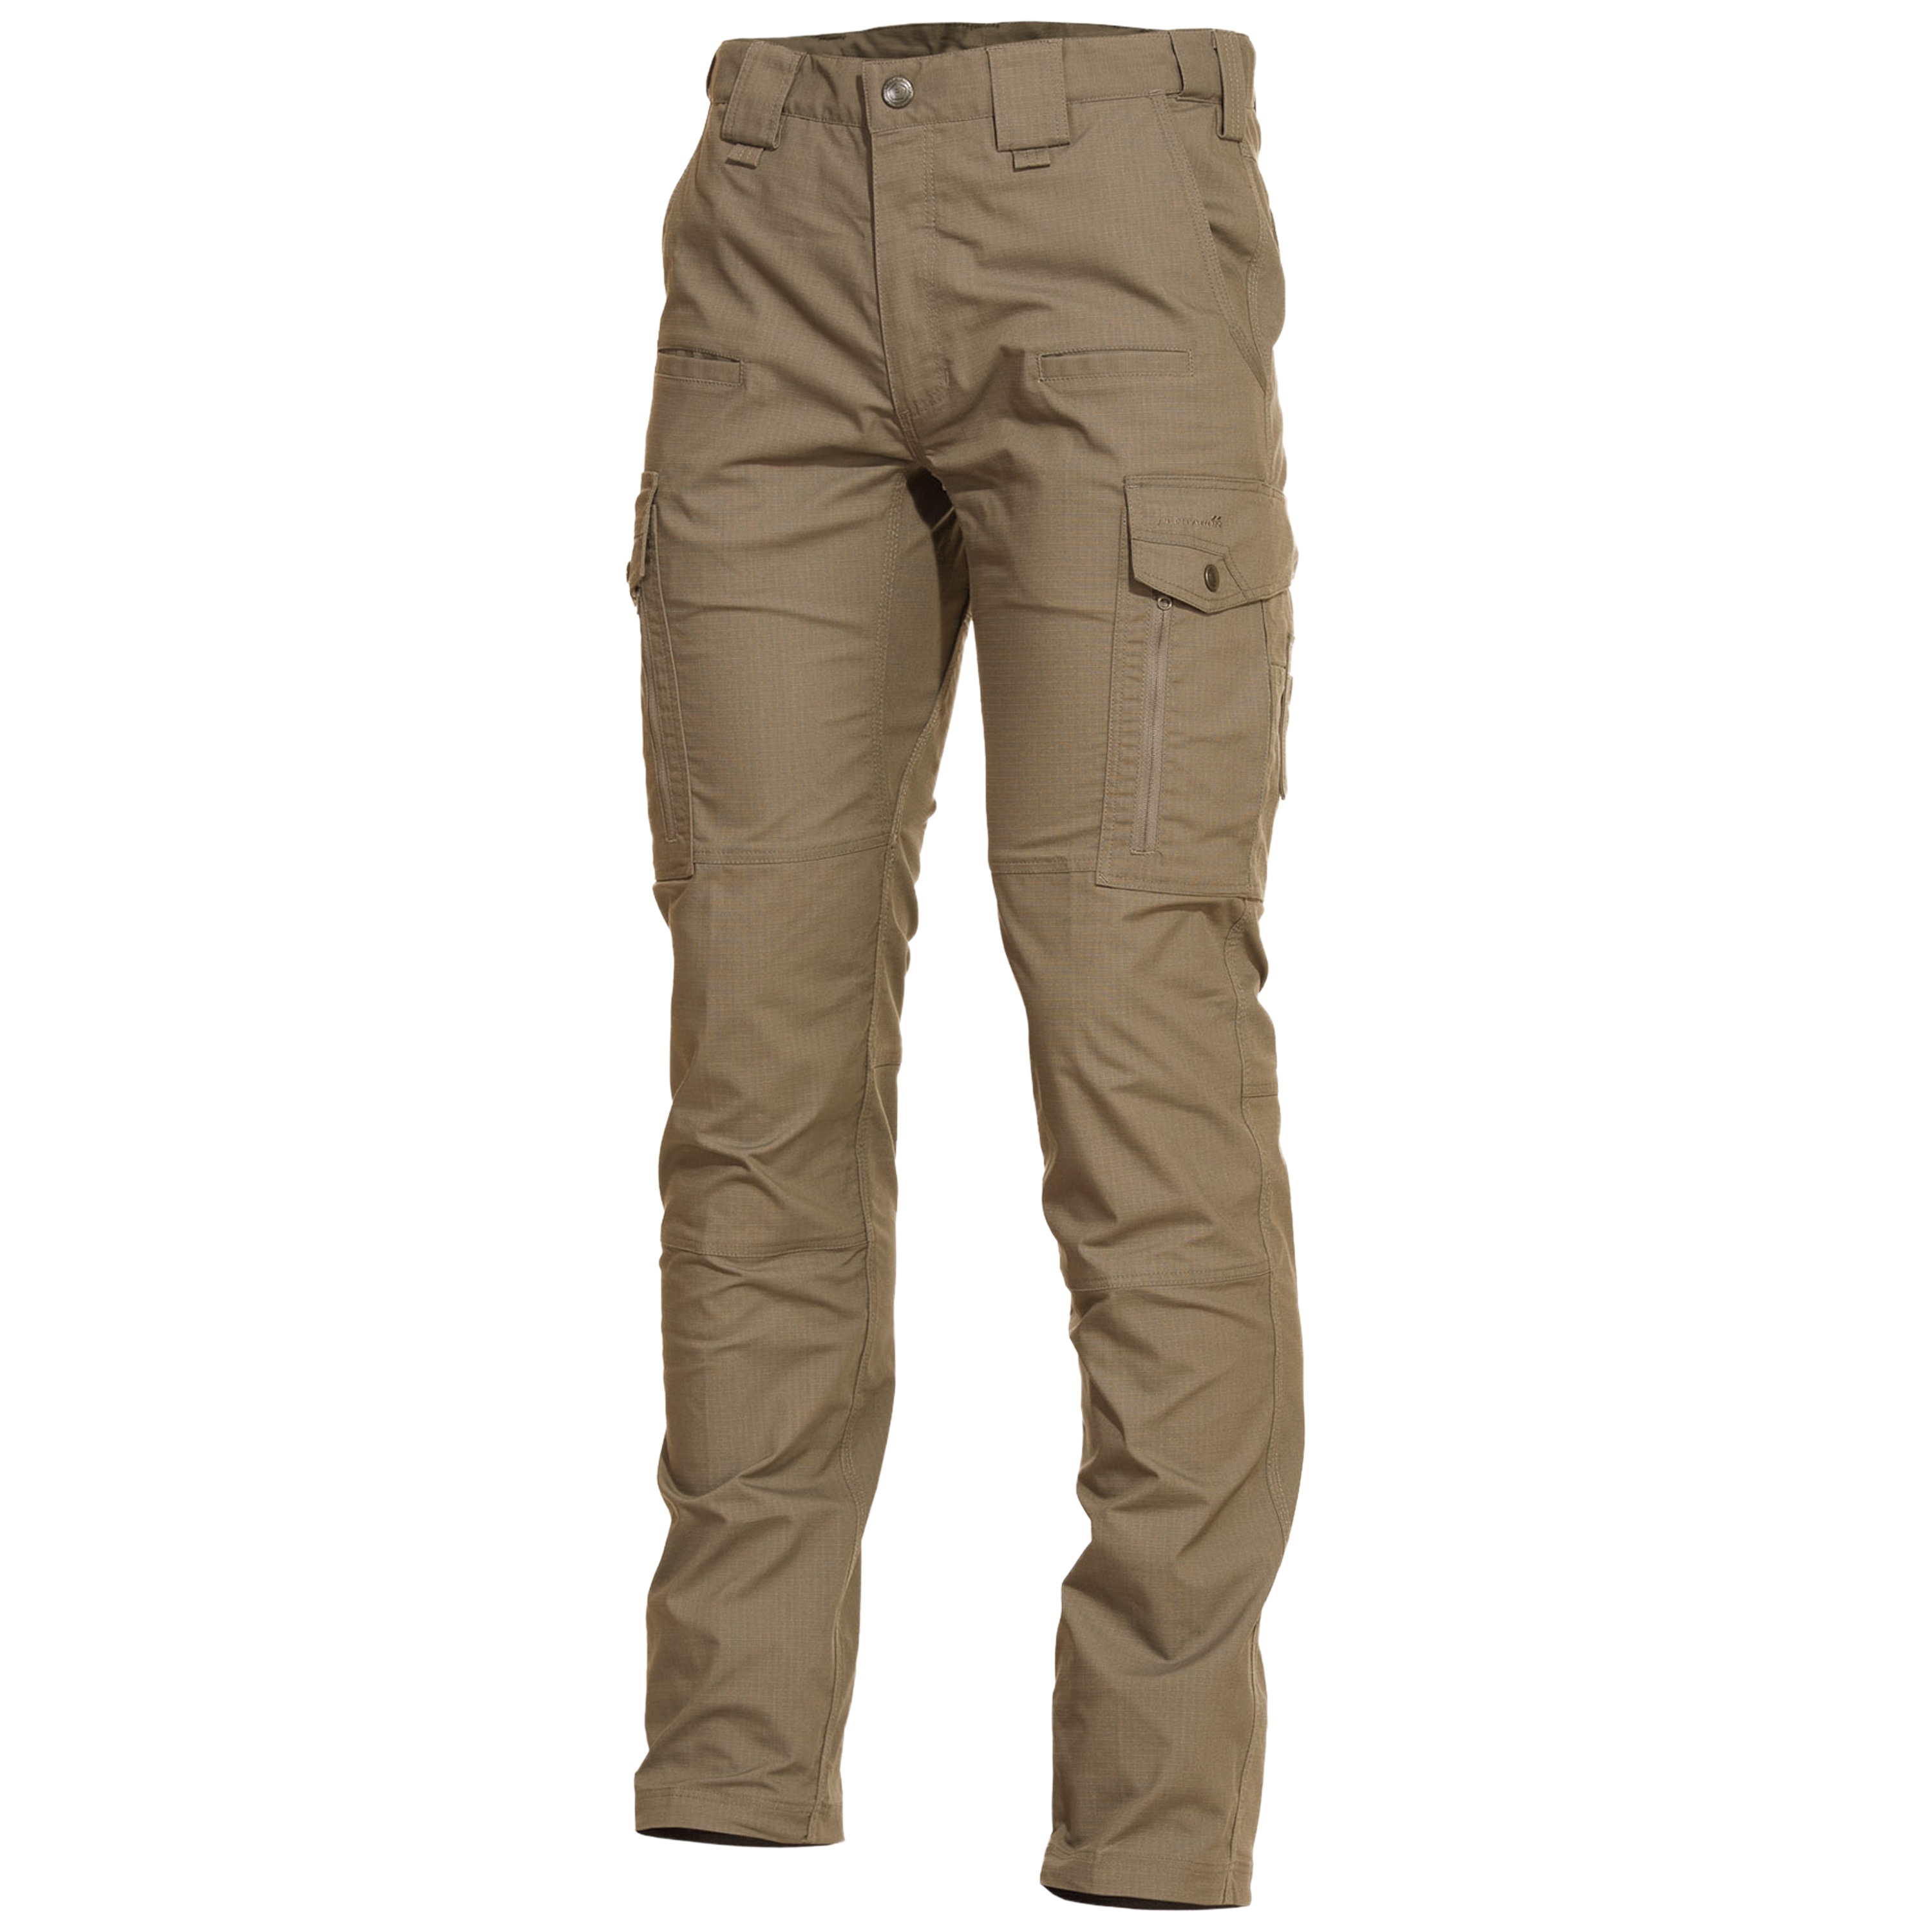 Purchase the Pentagon Pants Ranger 2.0 coyote by ASMC